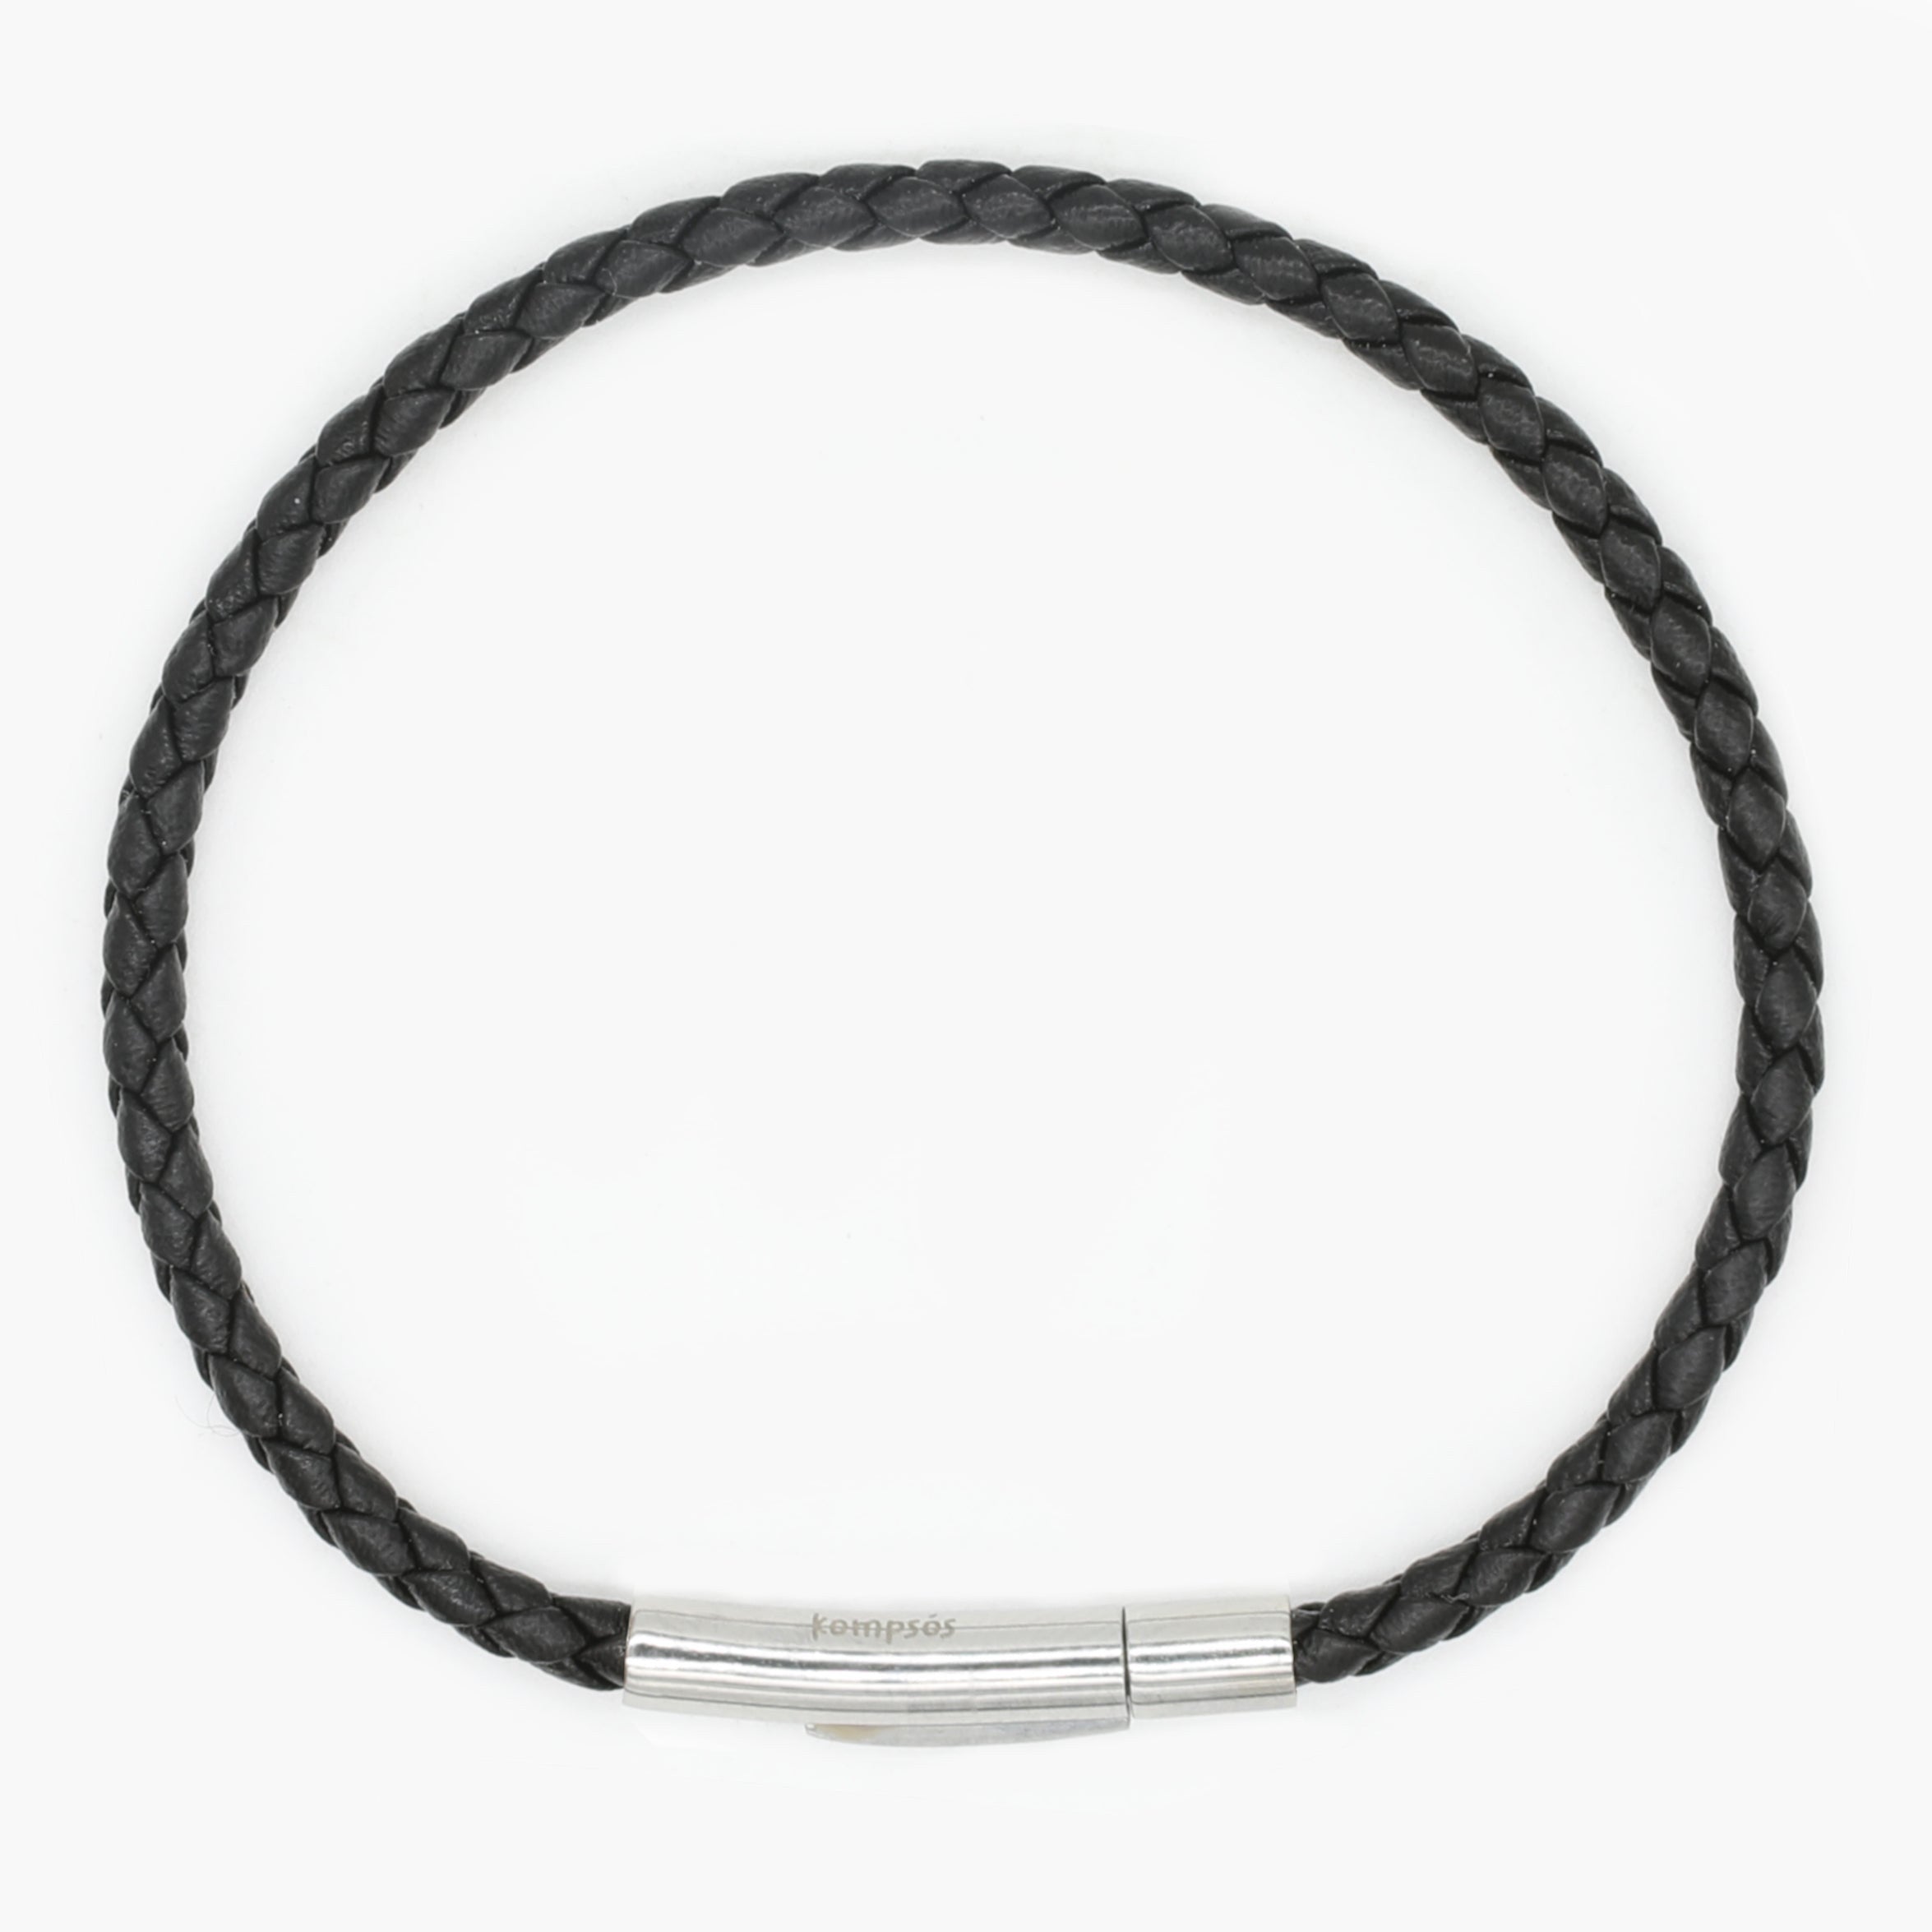 3mm Braided Leather Bracelets, 4 MORE colors